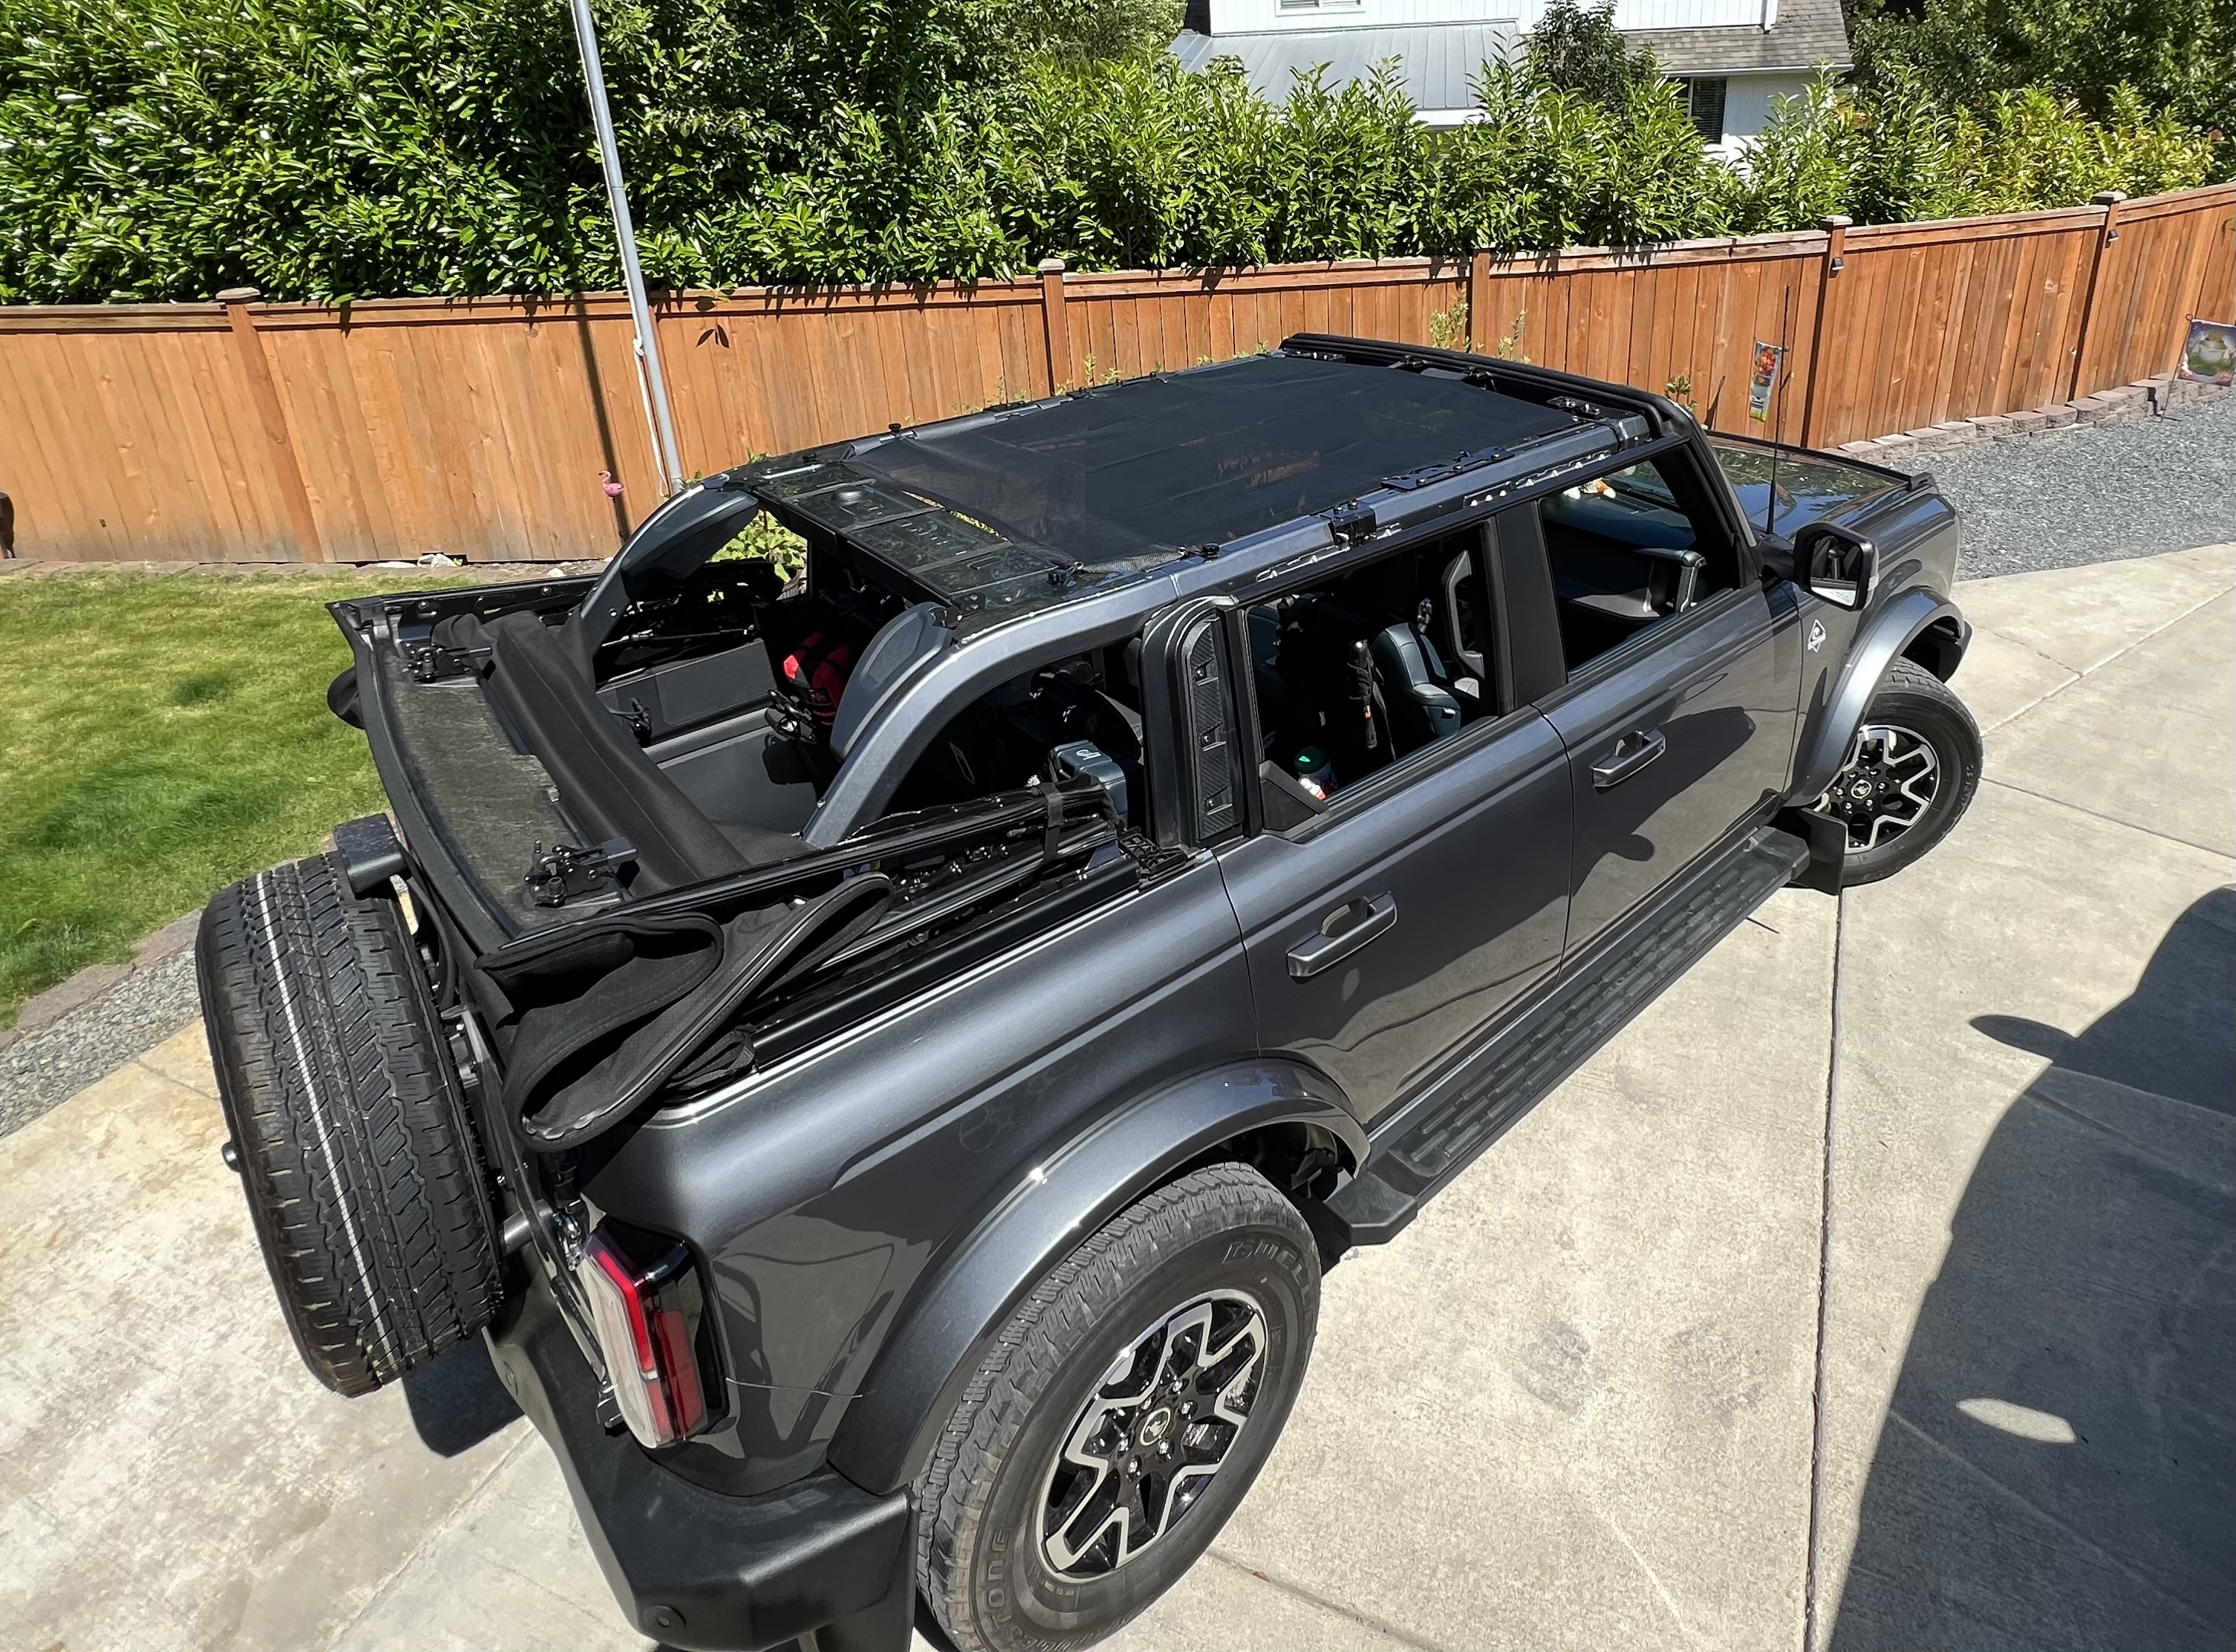 Ford Bronco 7/15/22 - The adventure begins - New 2022 Carbonized Gray Outer Banks 4dr “Lux” 57ED983D-F90A-4ECD-BDCF-25B851E22E5D